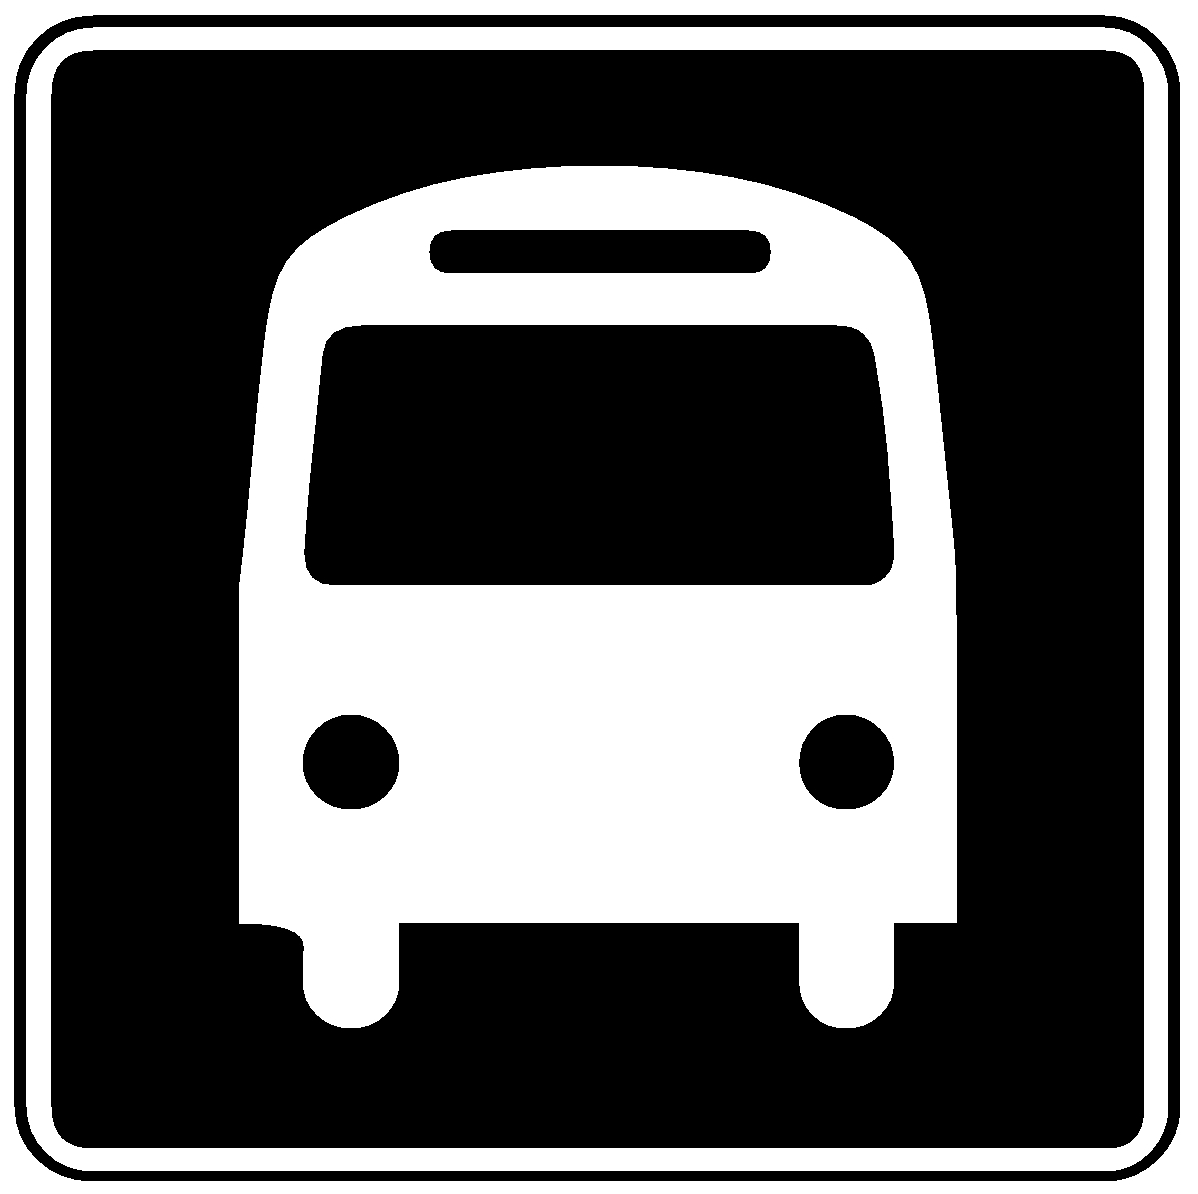 1 BUS SCHEDULE PARX CASINO TO 54TH-CITY